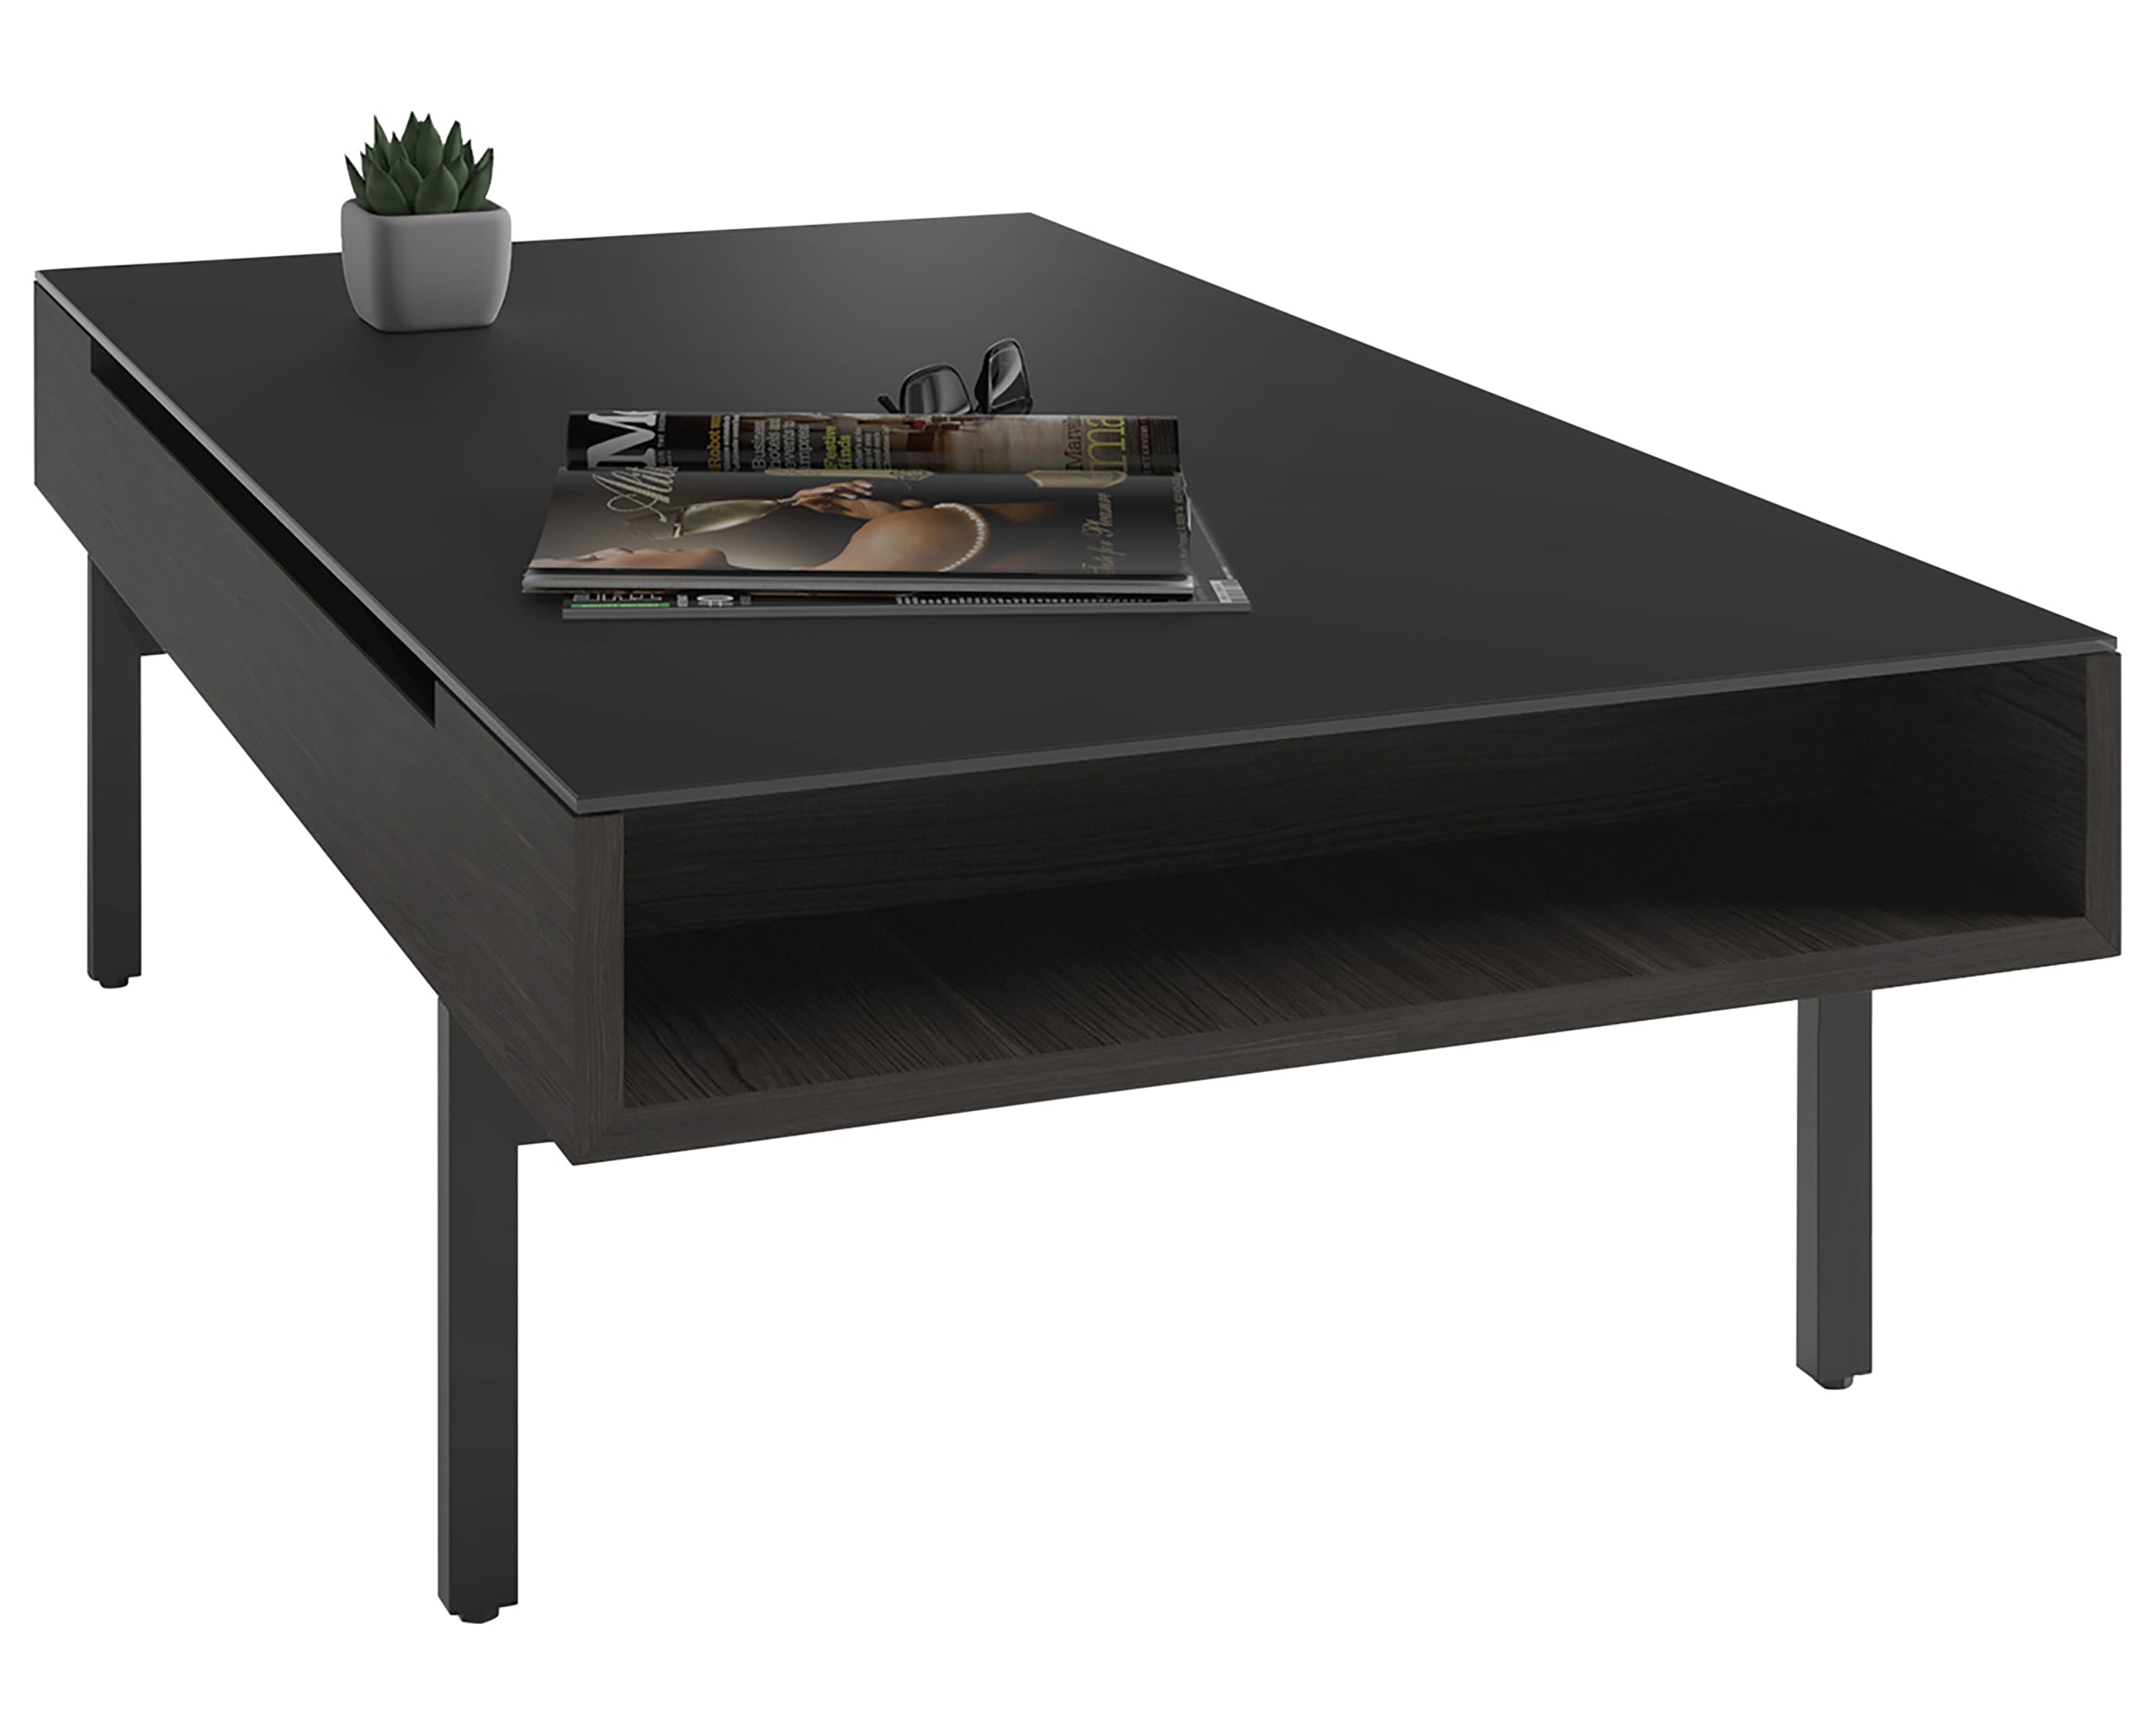 Charcoal Ash Veneer &amp; Black Satin-Etched Glass with Black Steel | BDI Reveal Lift Coffee Table | Valley Ridge Furniture